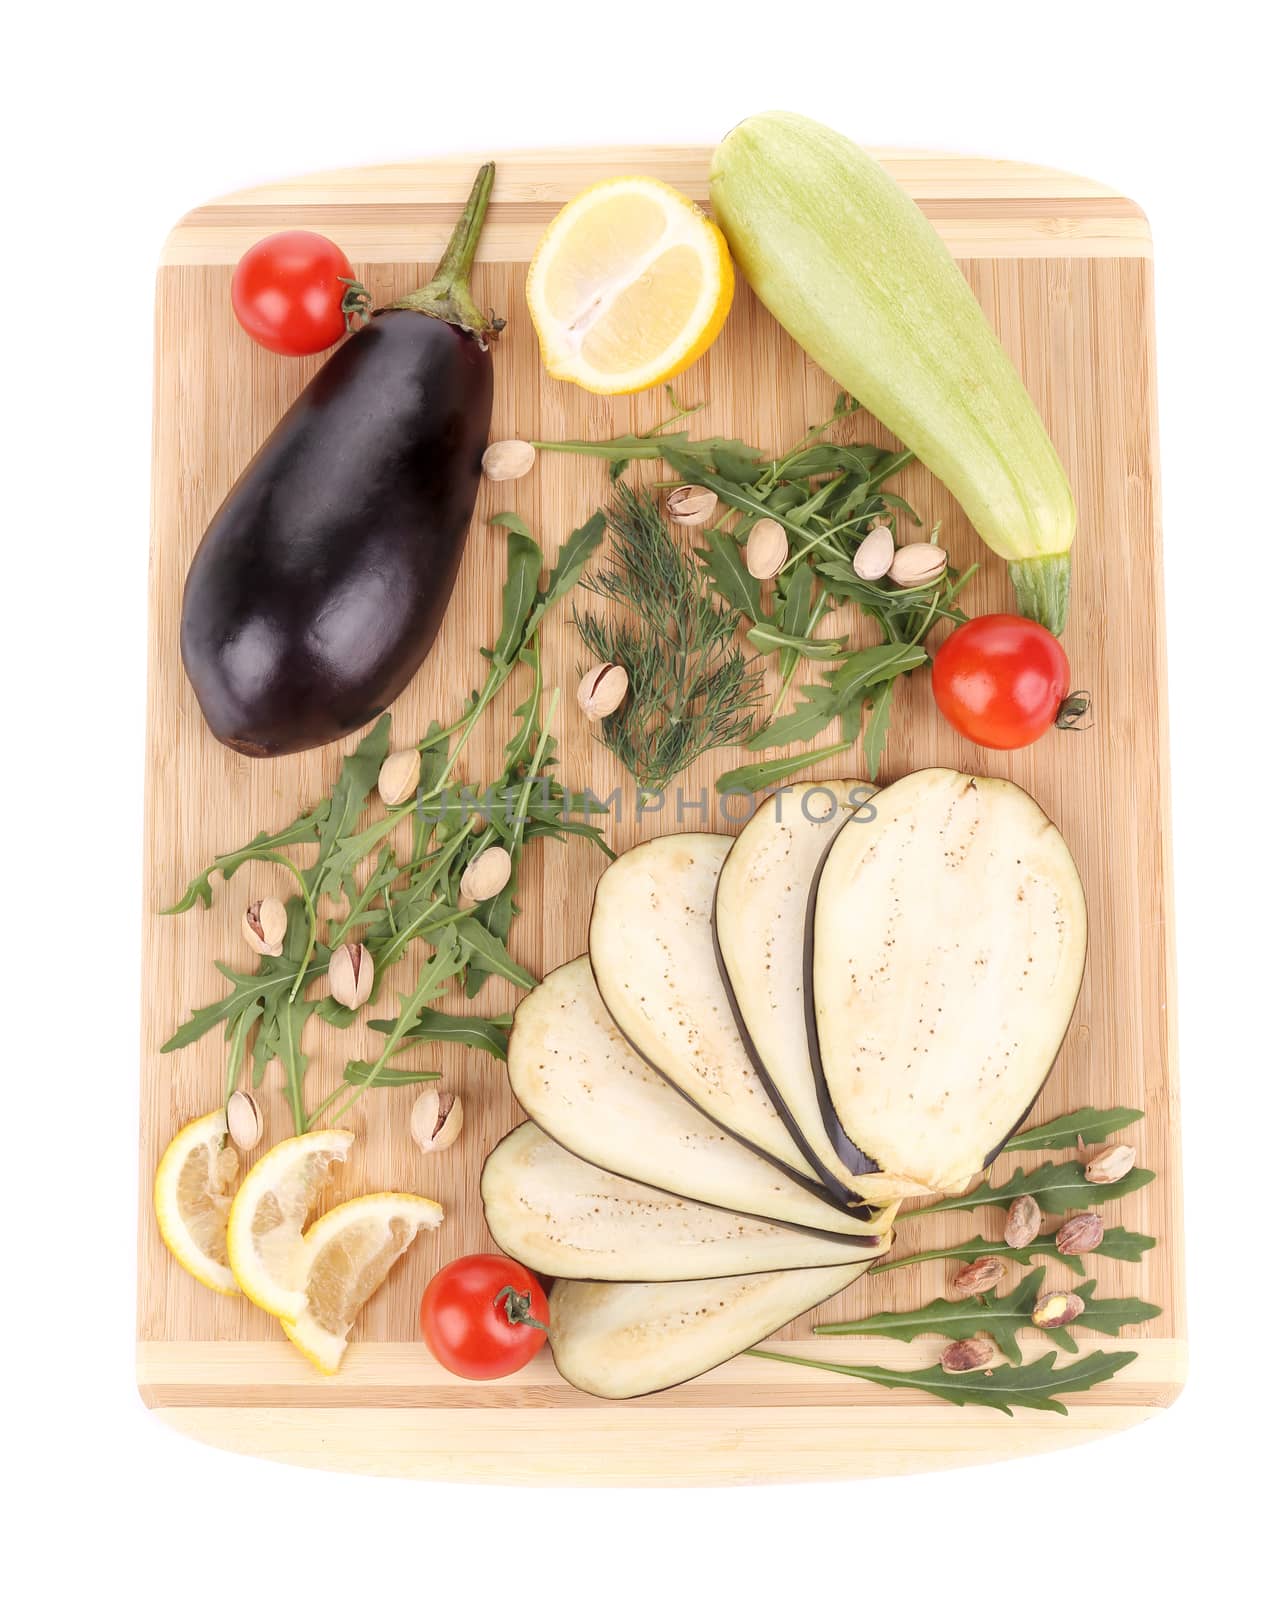 Vegetables on wooden board. Isolated on a white background.